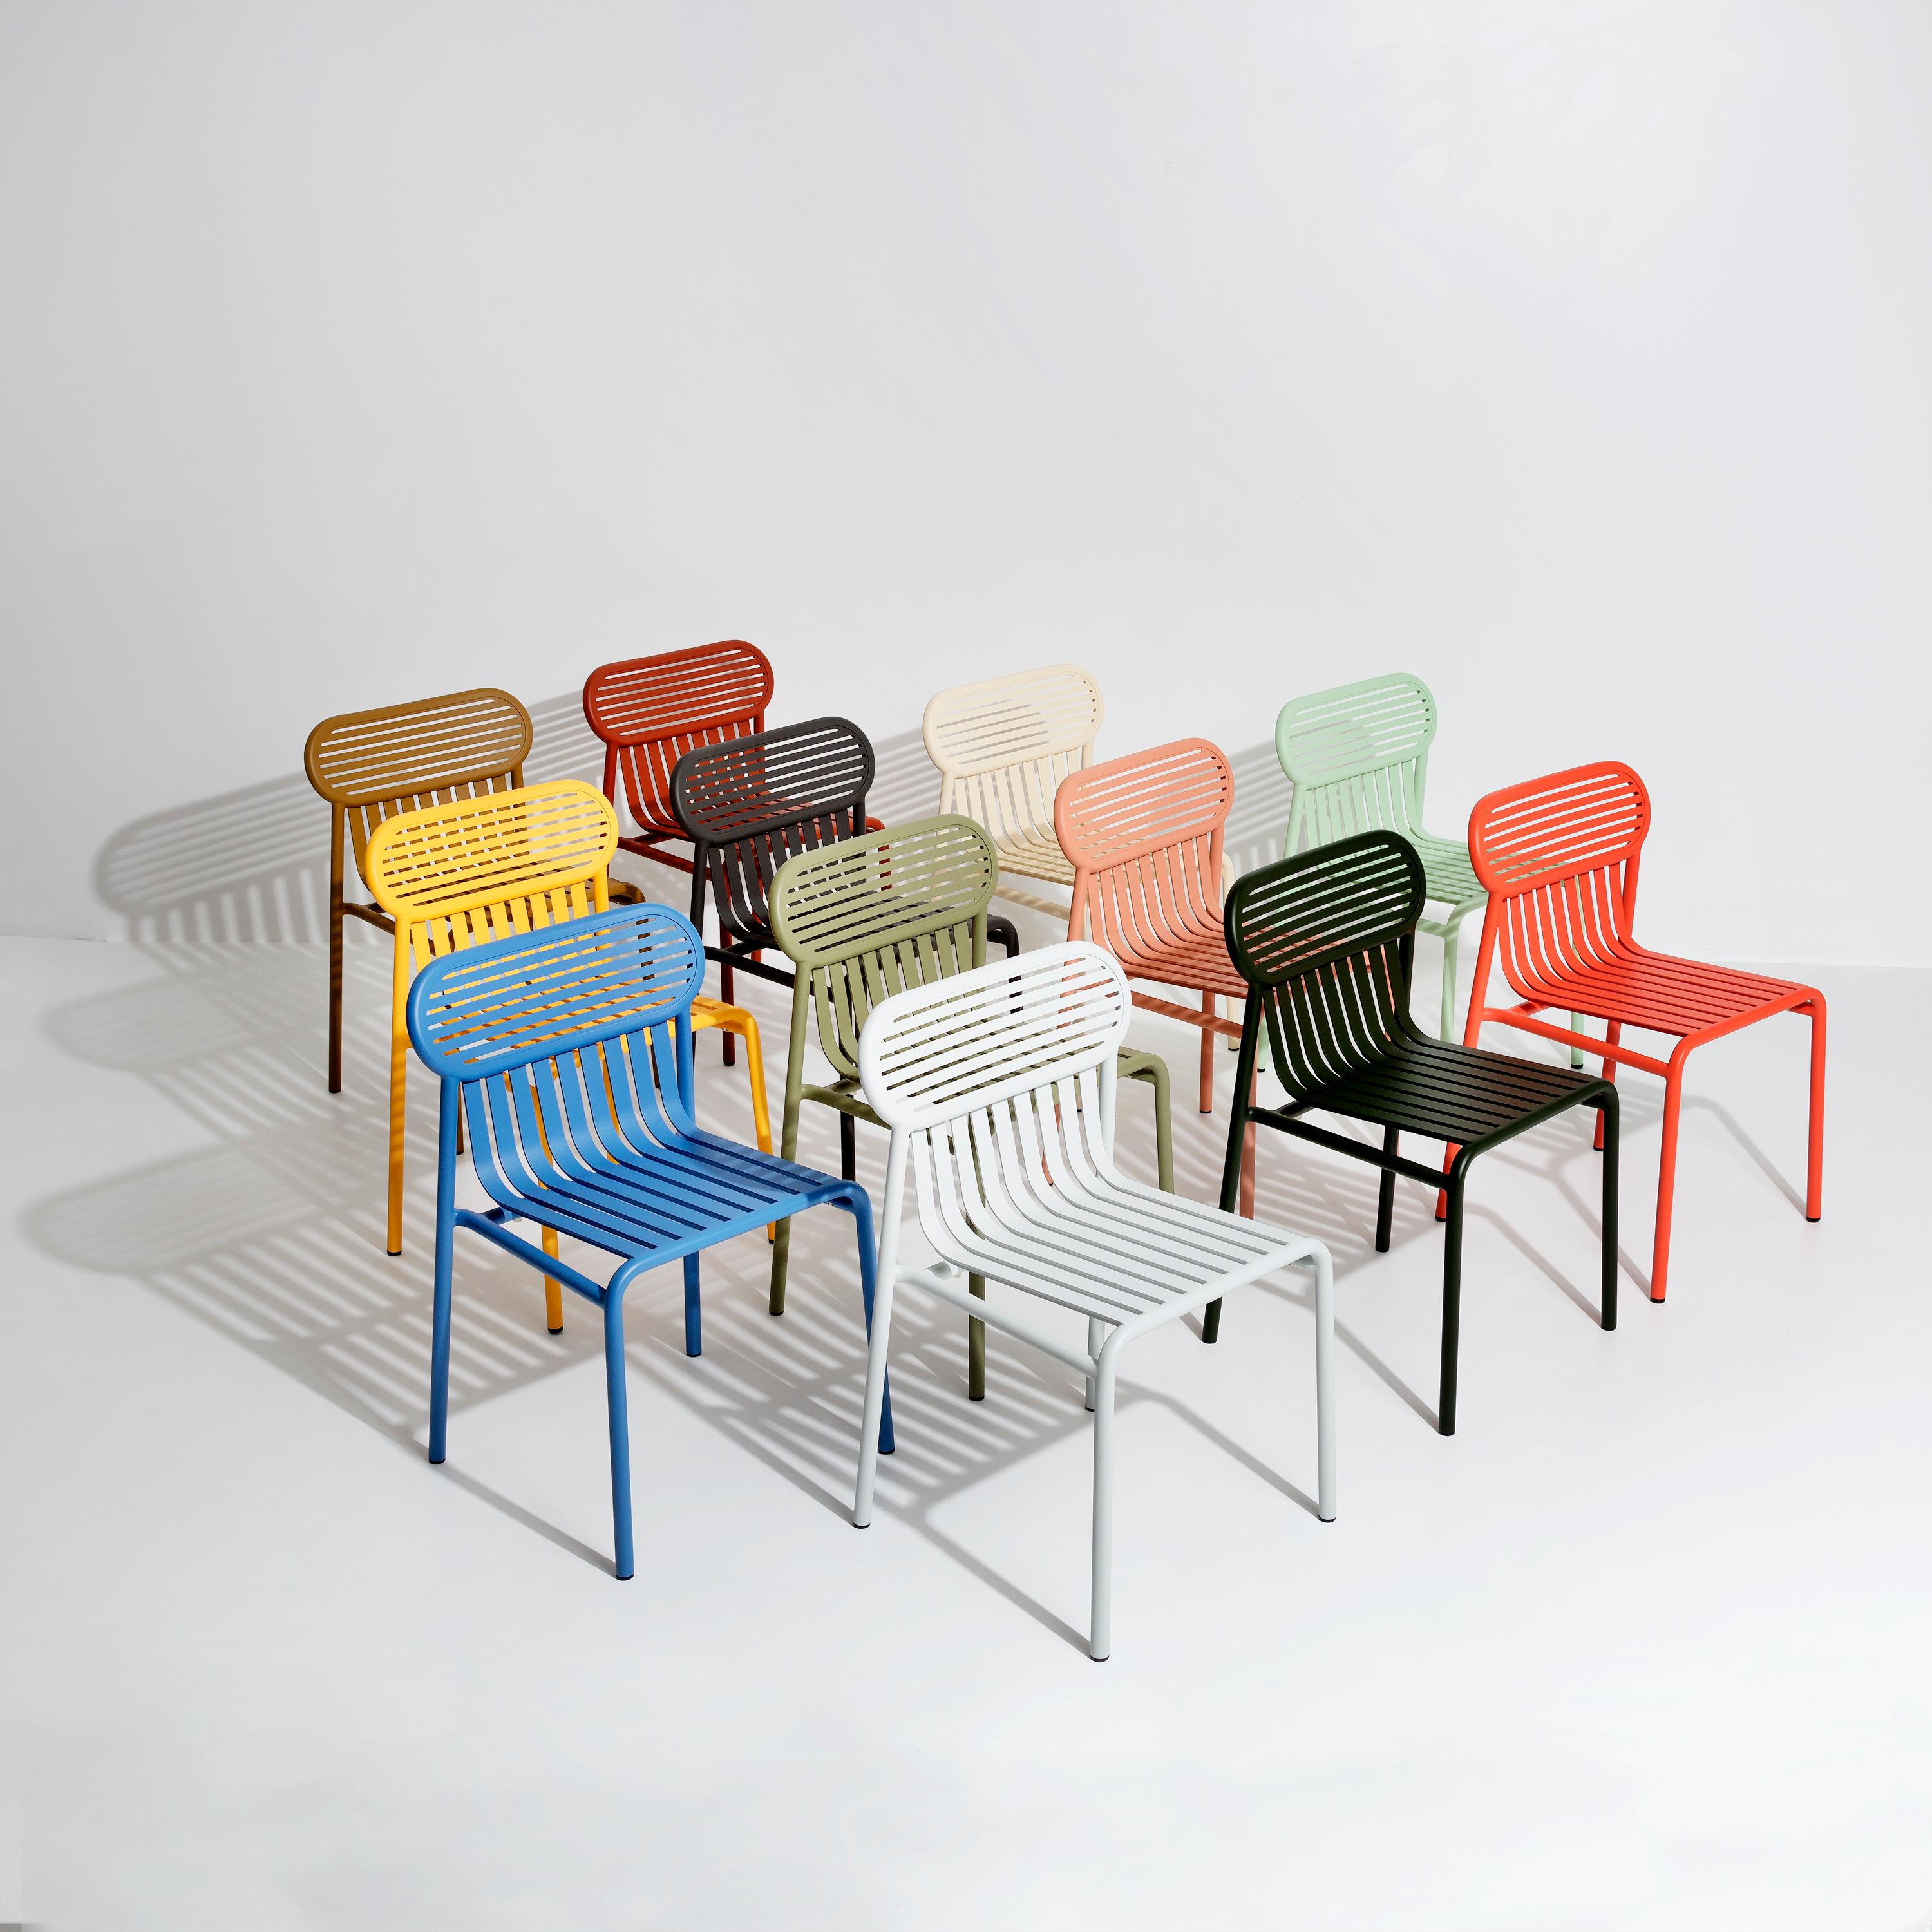 Petite Friture Week-End Chair in Ivory Aluminium by Studio BrichetZiegler, 2017

The week-end collection is a full range of outdoor furniture, in aluminium grained epoxy paint, matt finish, that includes 18 functions and 8 colours for the retail